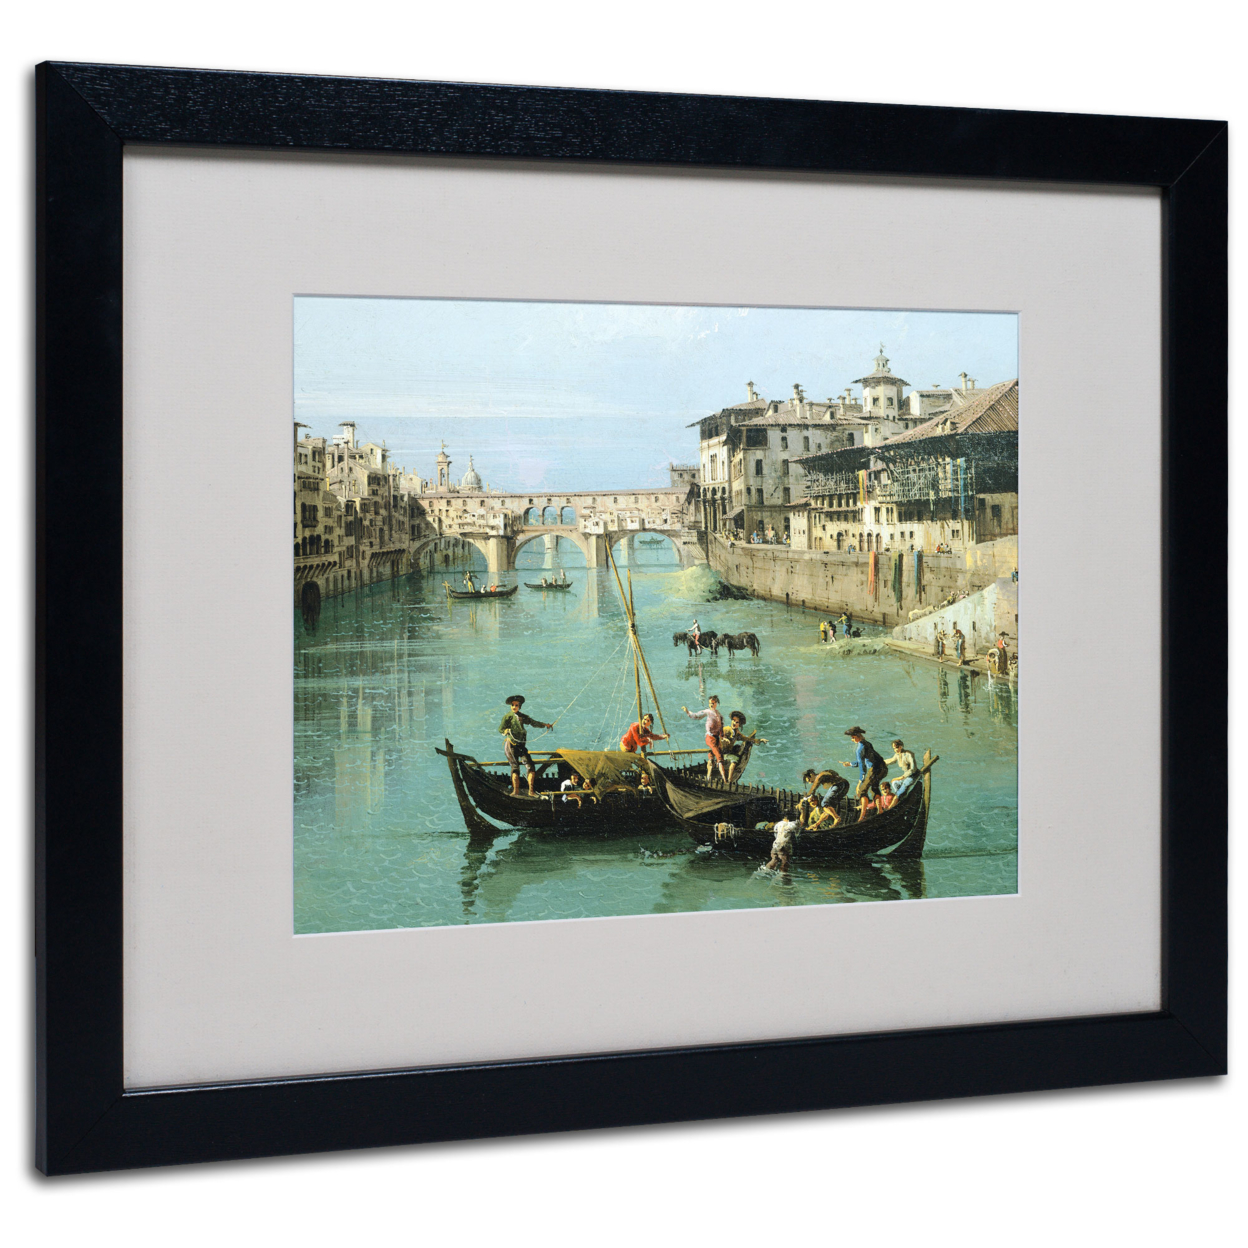 Canaletto 'Arno River And Ponte Vecchio' Black Wooden Framed Art 18 X 22 Inches